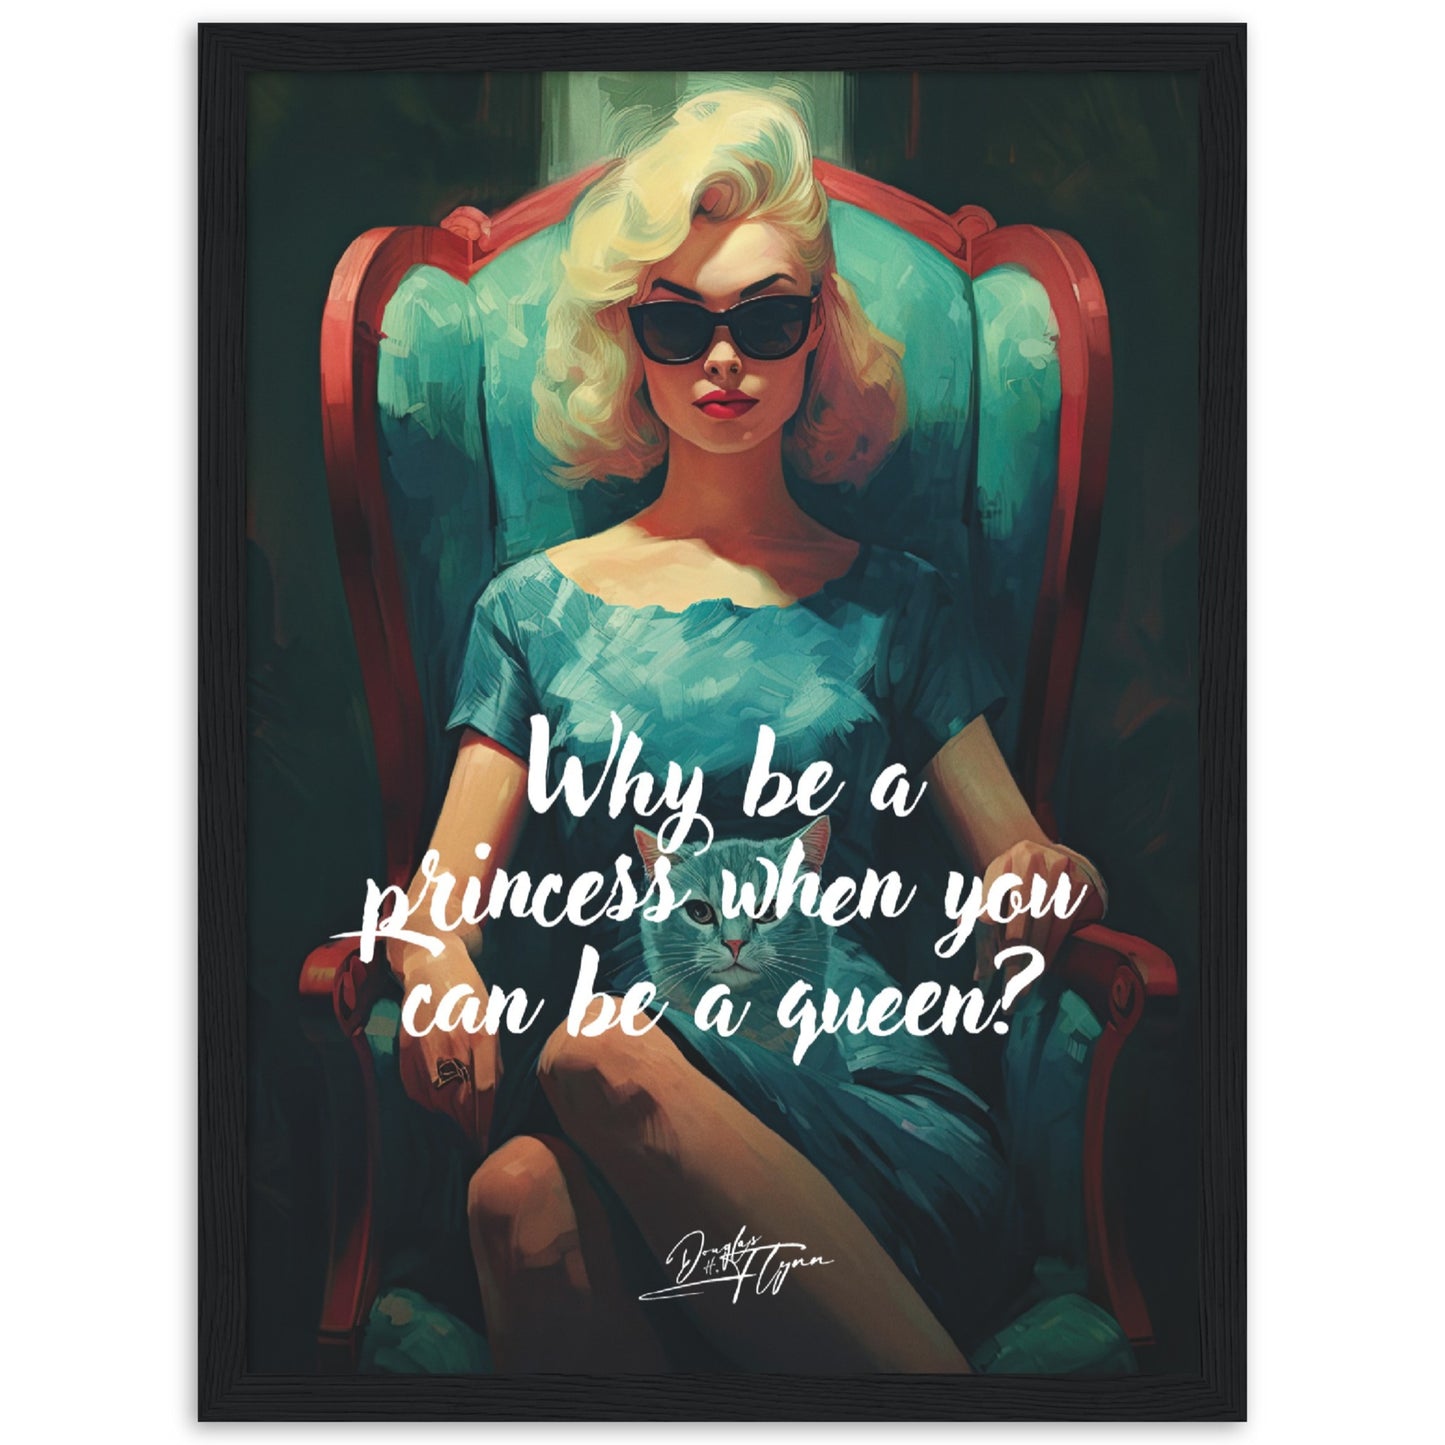 »Why be a princess when you can be a queen«